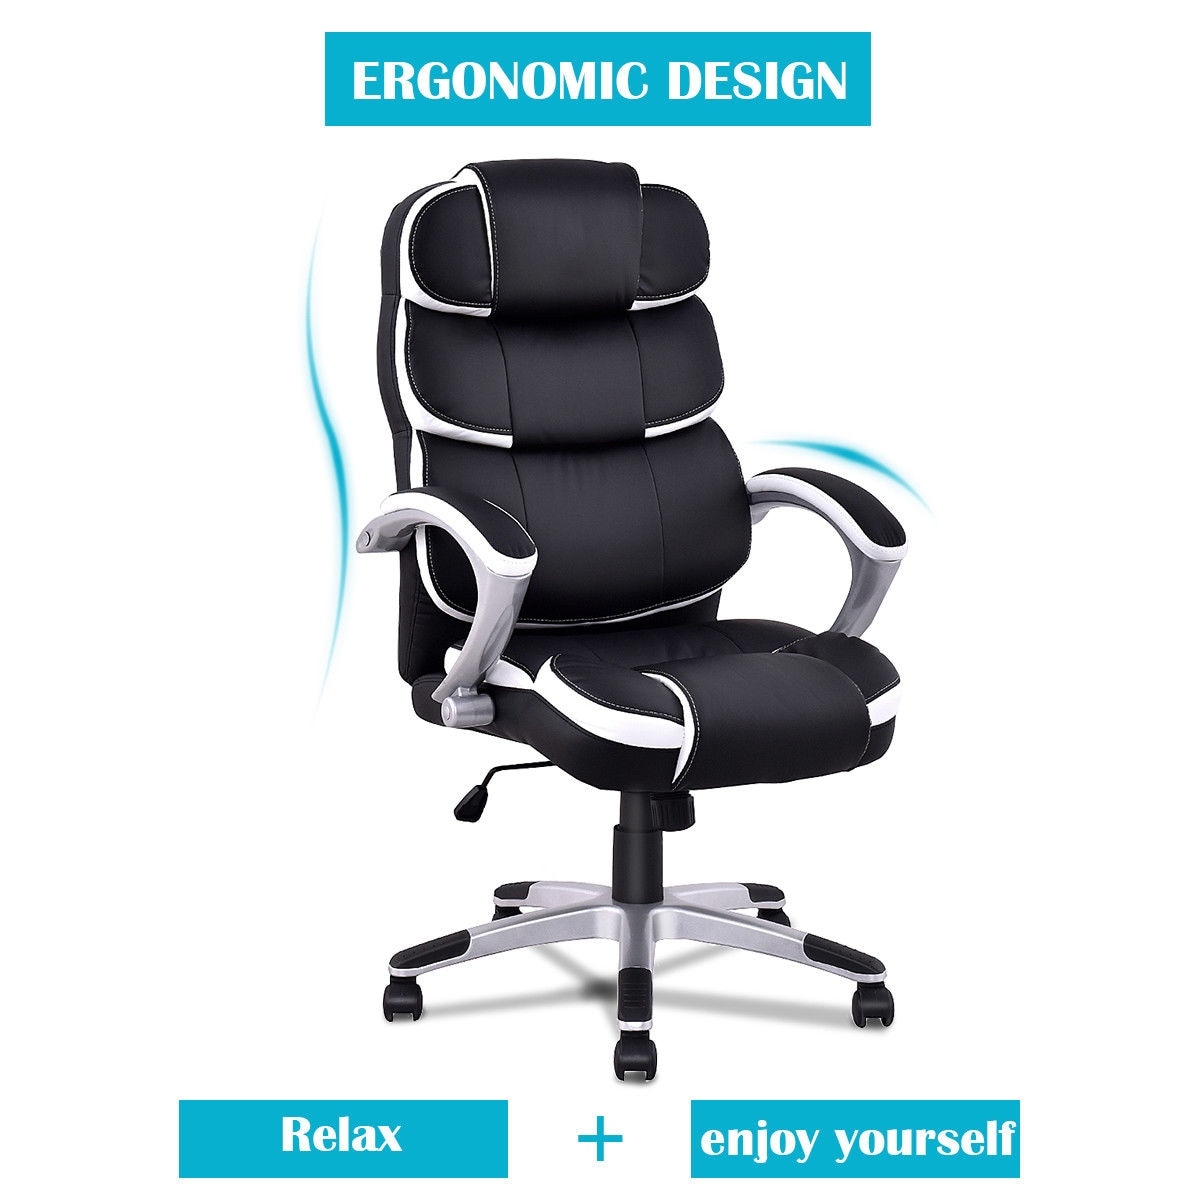 Pu Leather High Back Office Chair Executive Task Ergonomic Computer Desk Chairs Stools Business Industrial